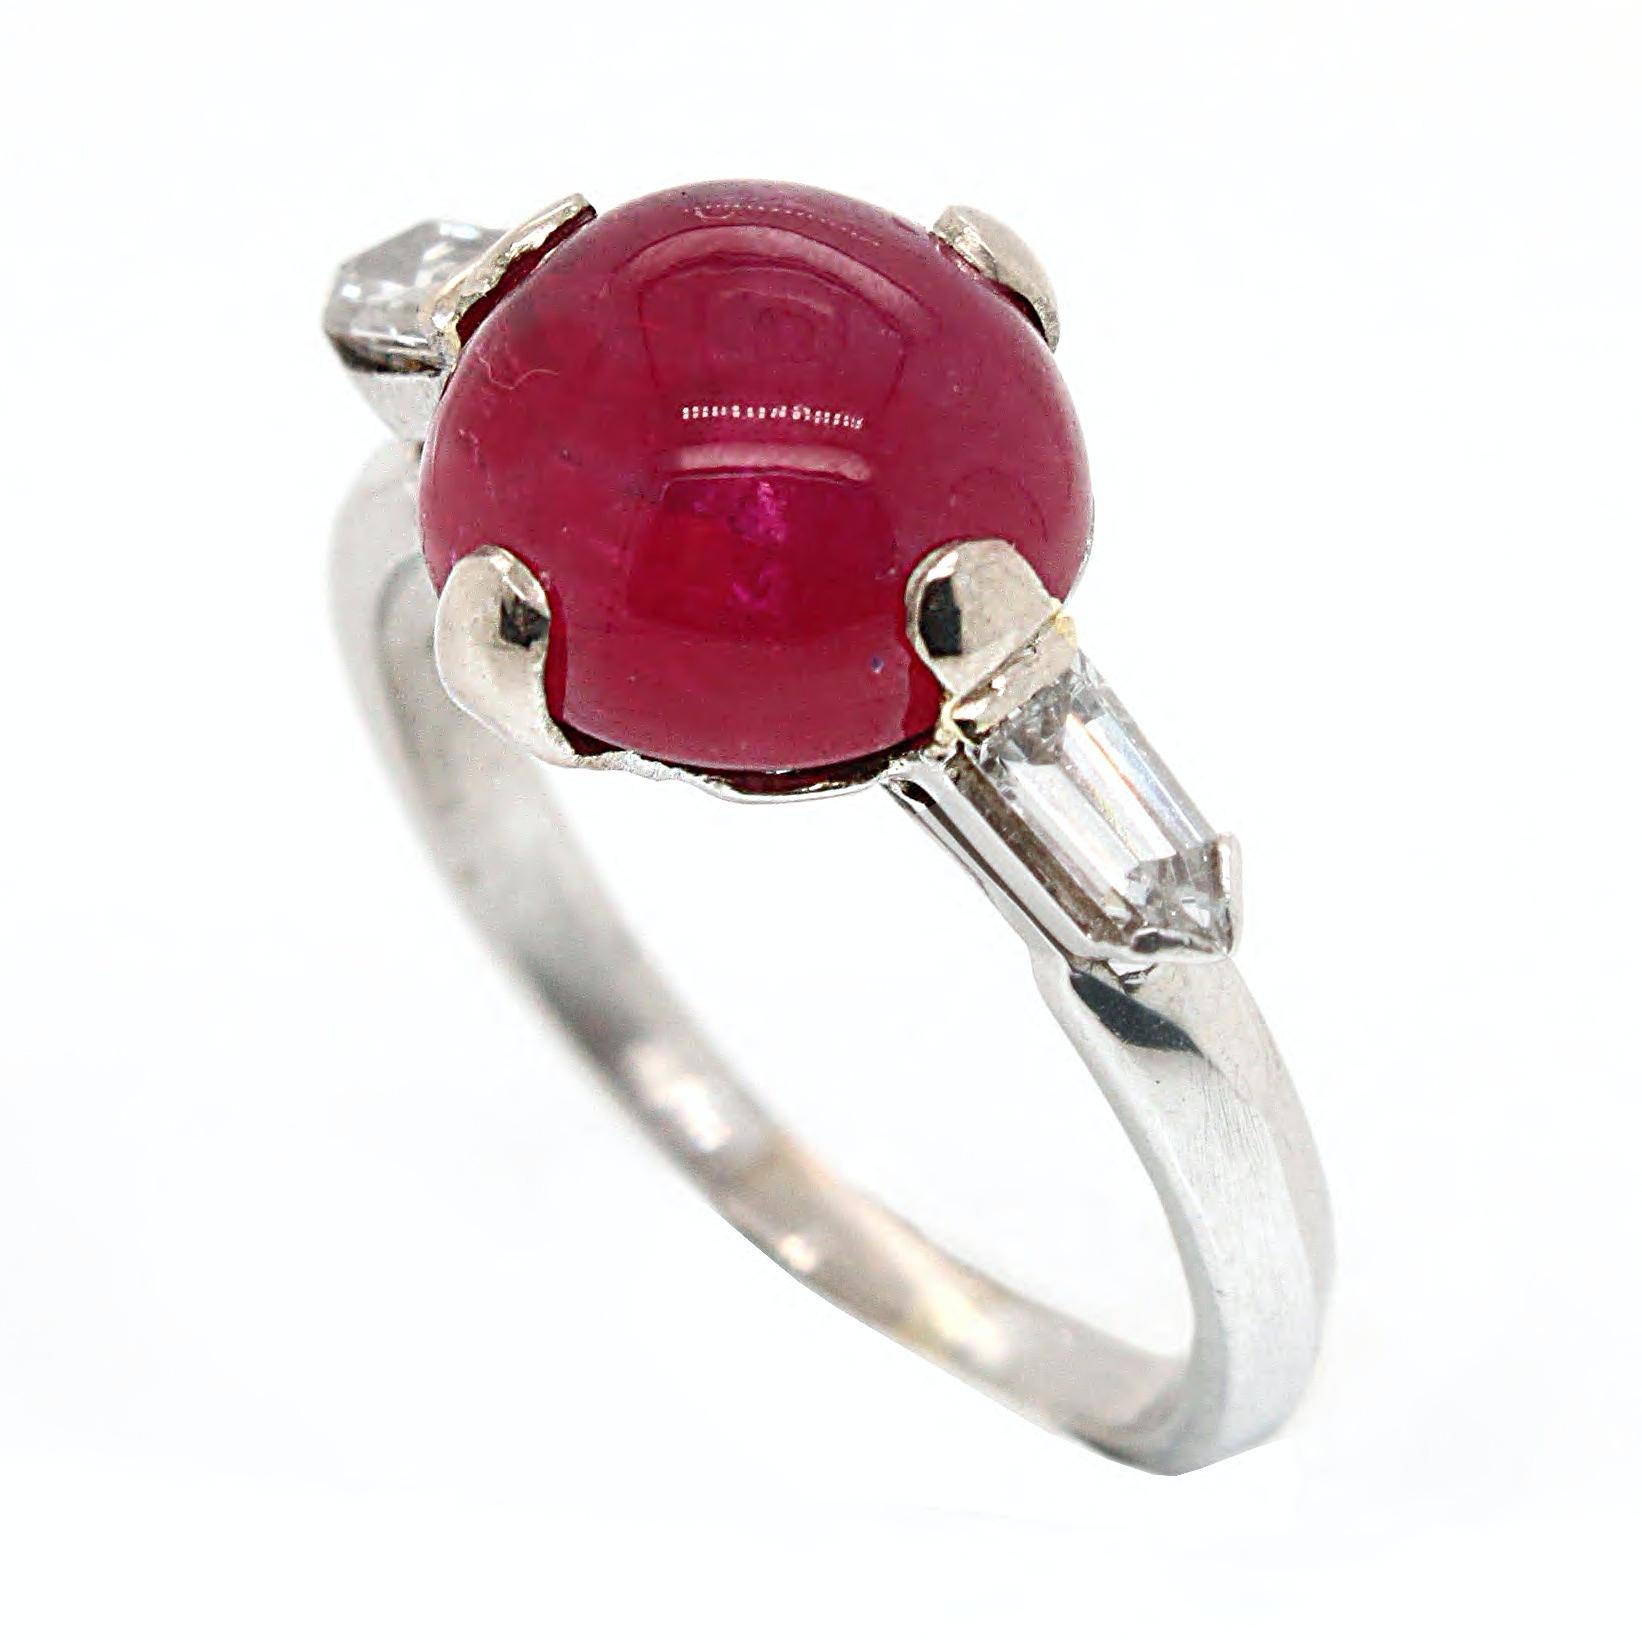 A large ruby cabochon and diamond Art Deco ring in white gold, ca. 1930s. The ruby weighs 6.26 carats and is accompanied by a gemological certificate stating that the stone is a natural ruby, not heat treated, and from Burmese (Myanmar) origin. It